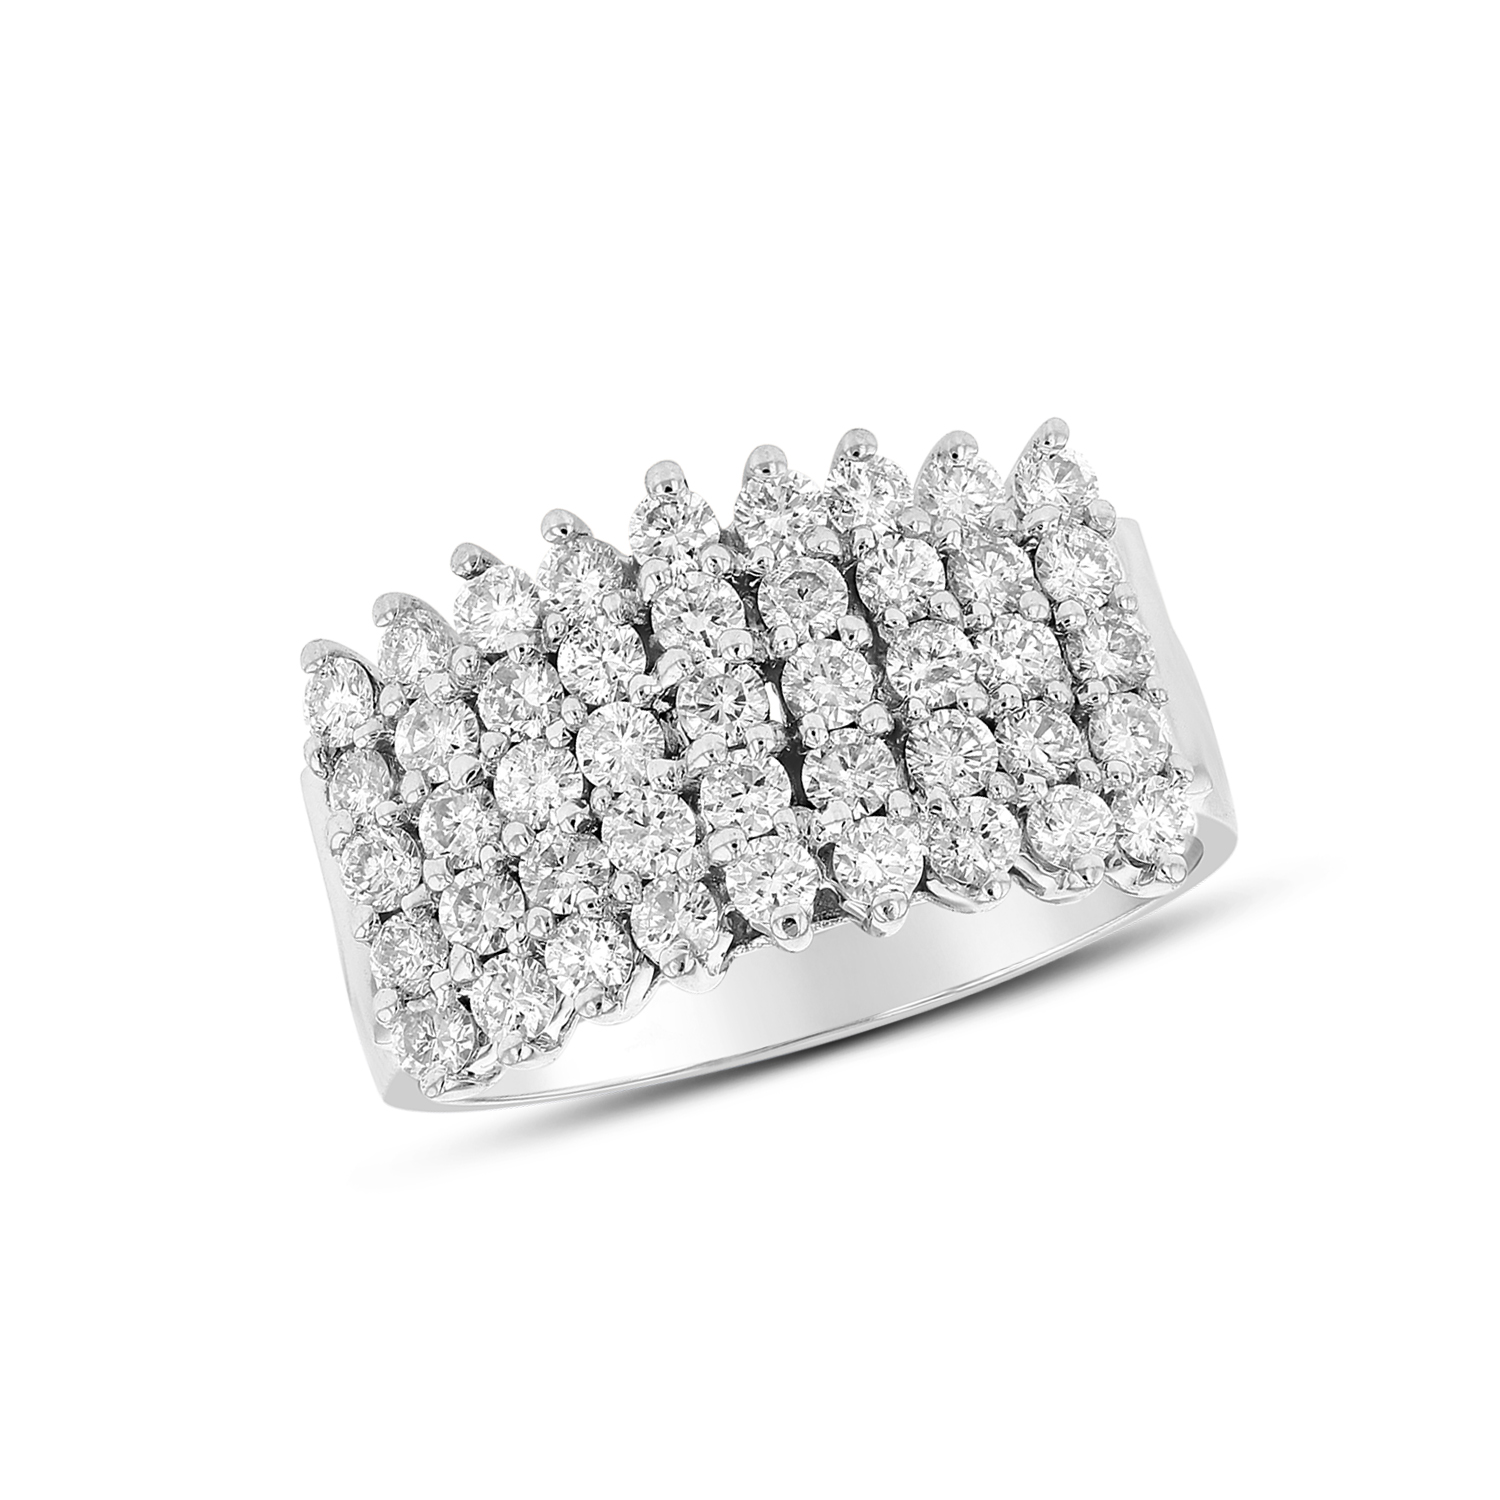 View 1.25ctw Diamond Band in 14k White Gold